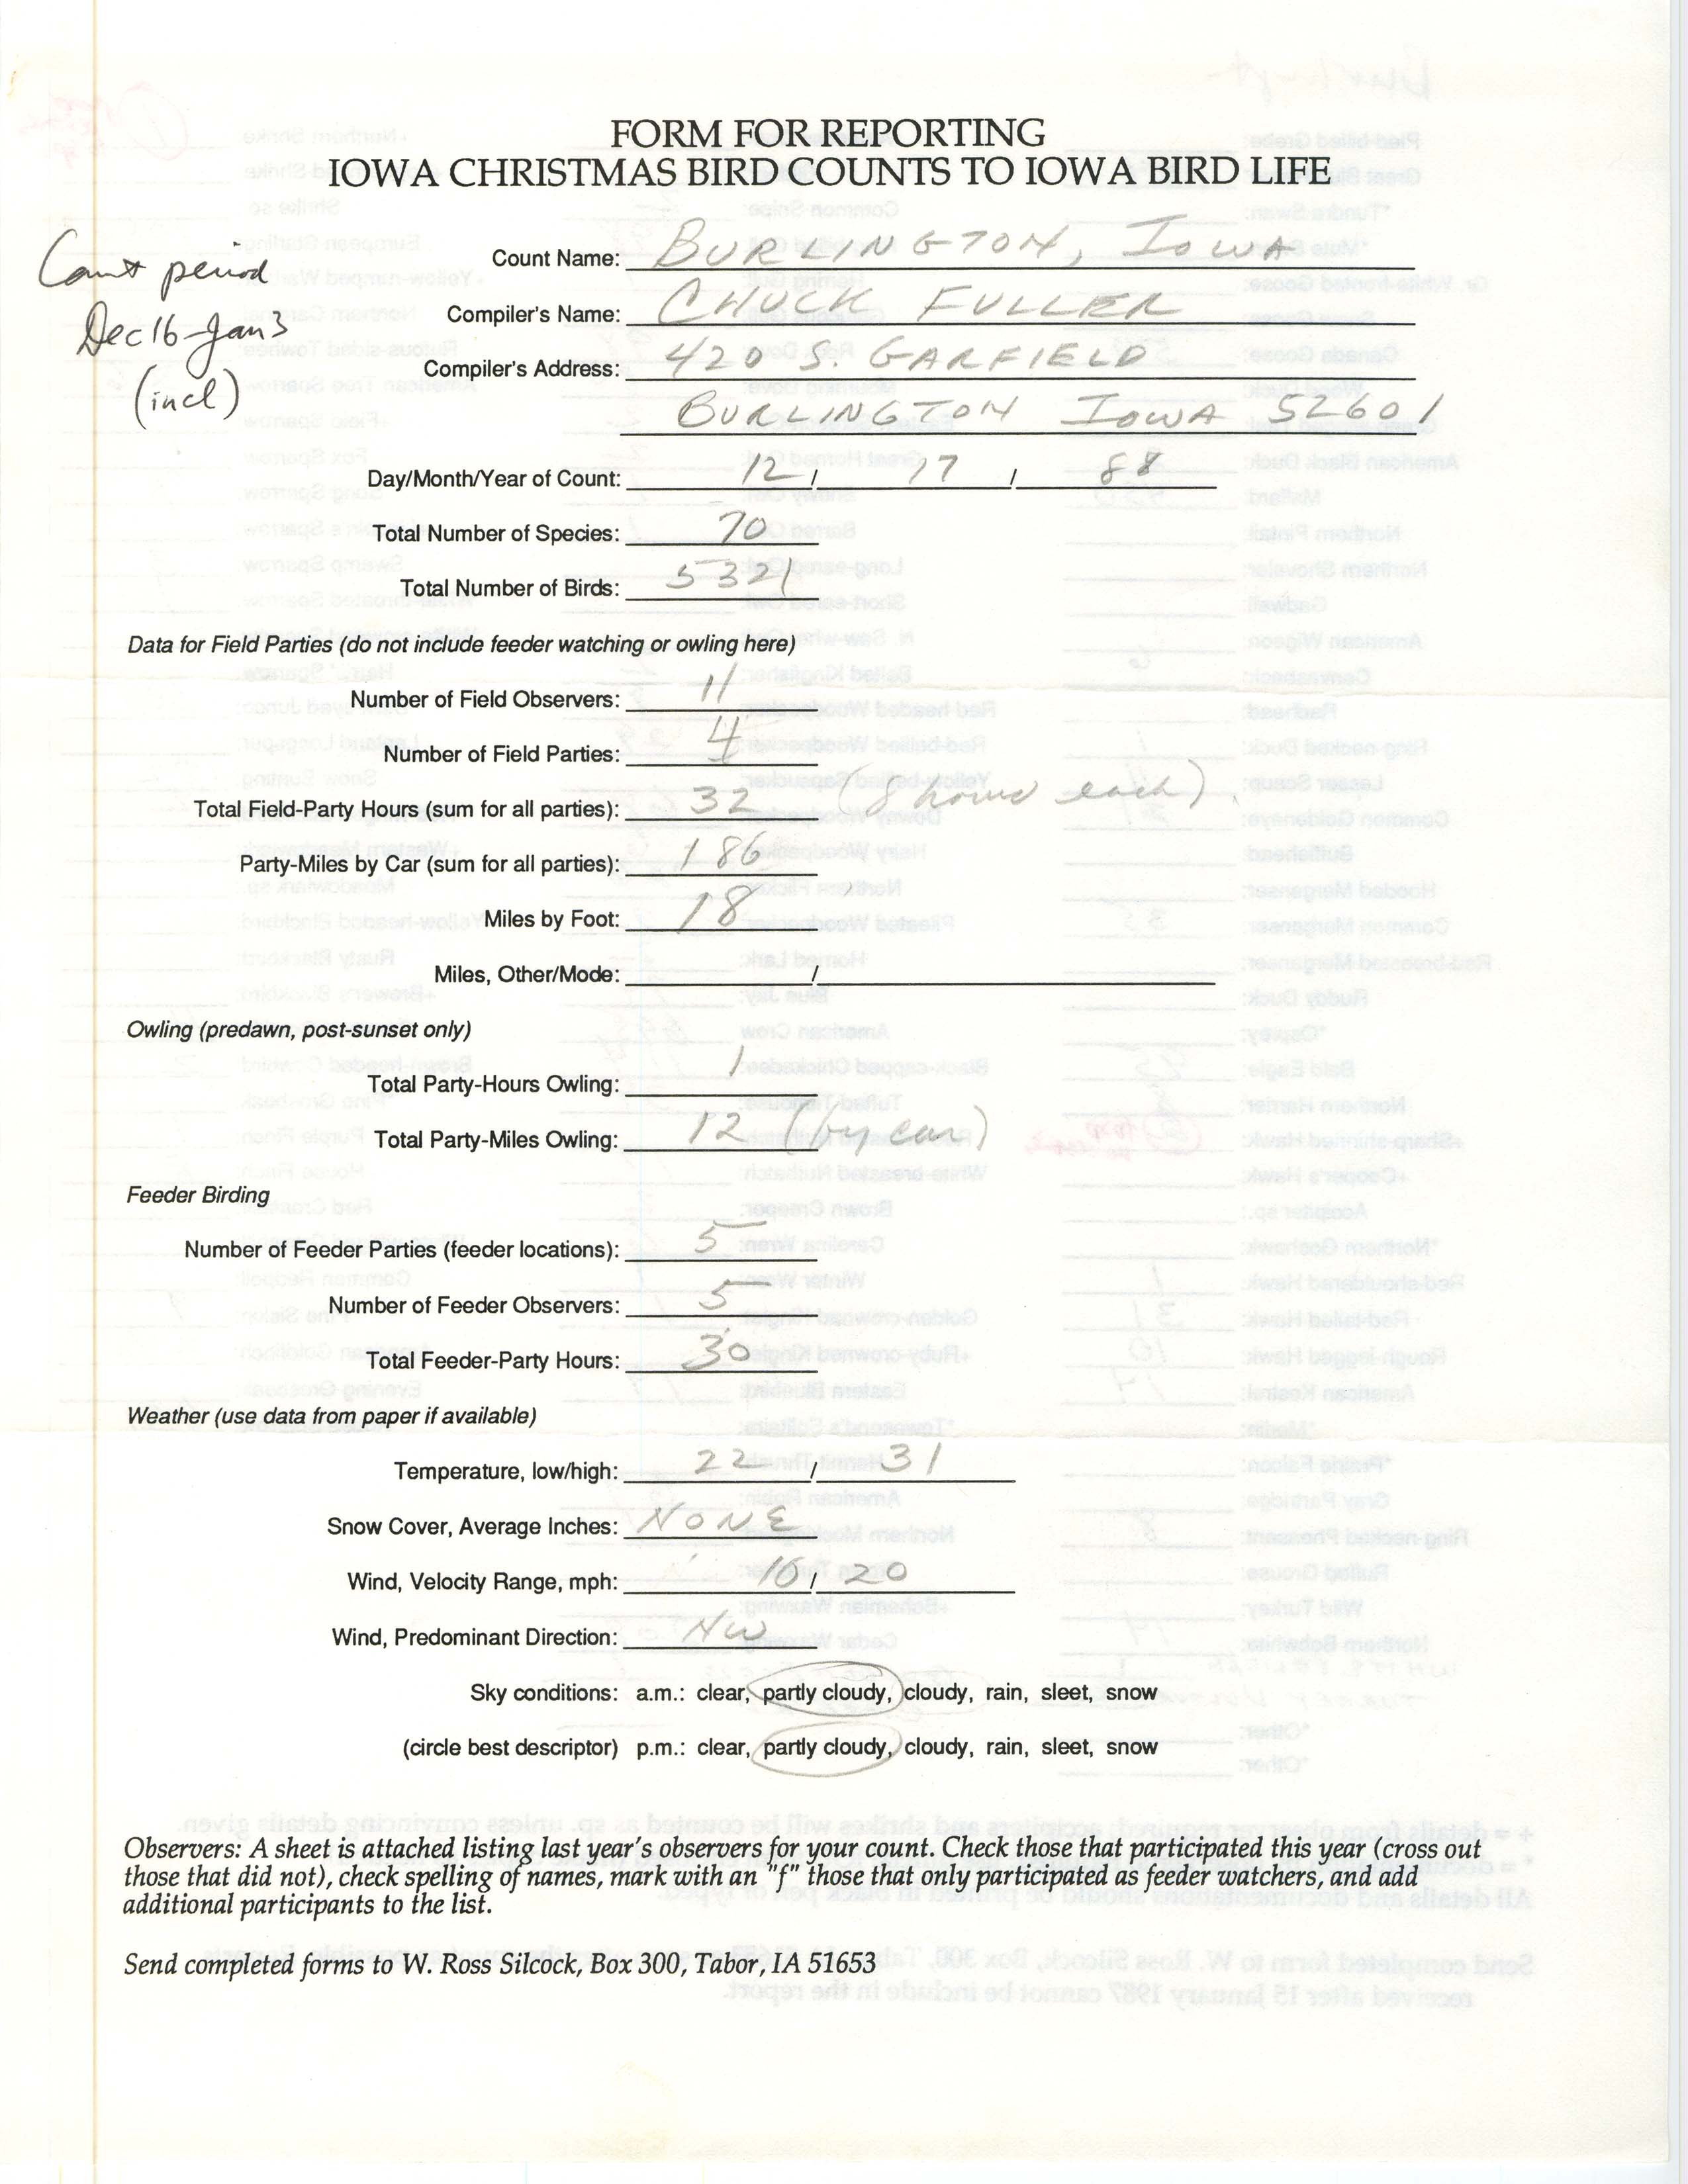 Form for reporting Iowa Christmas bird counts to Iowa Bird Life, Charles Fuller, December 17, 1988